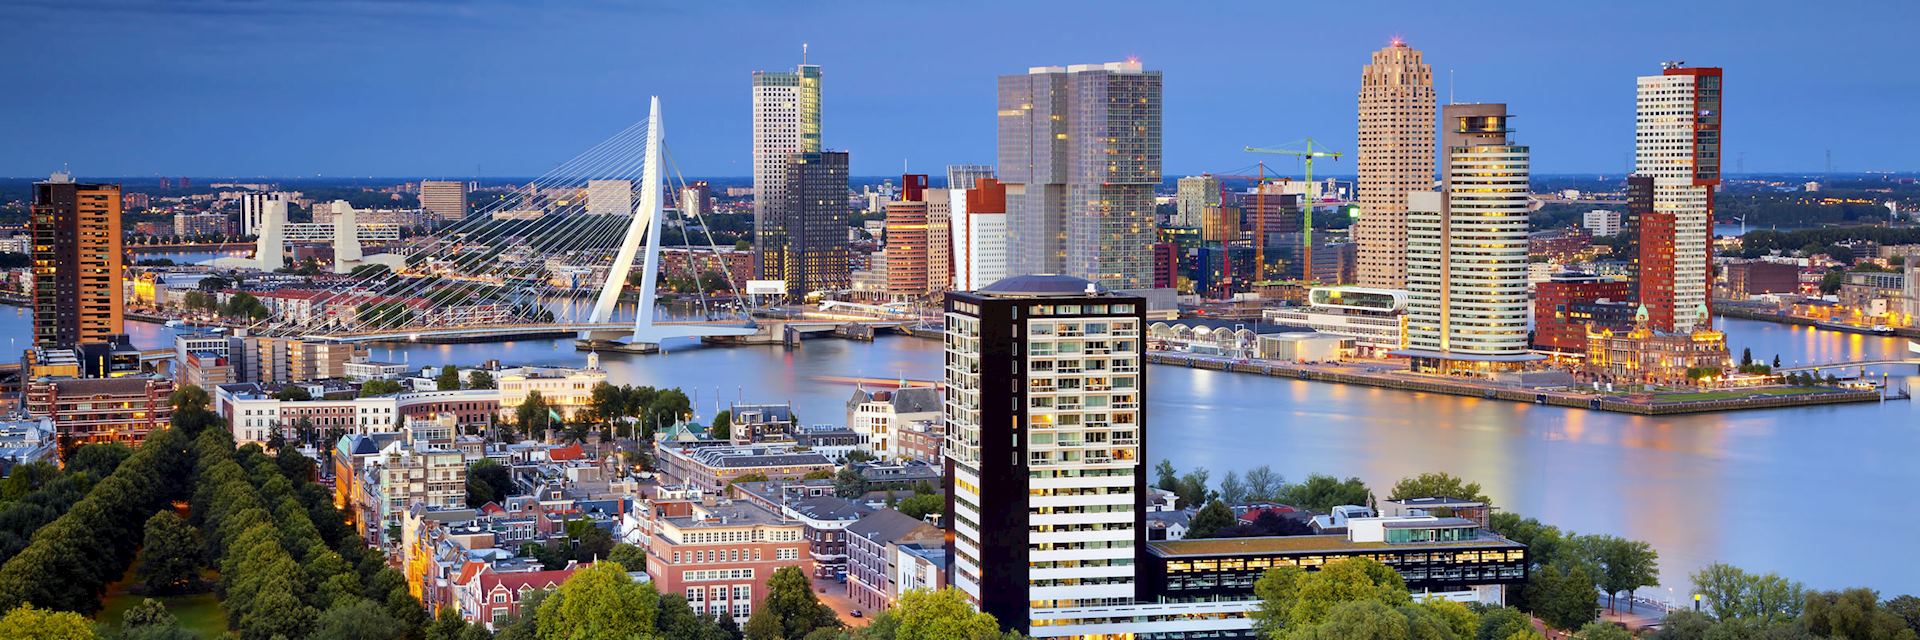 Visit Rotterdam On A Trip To The Netherlands Audley Travel